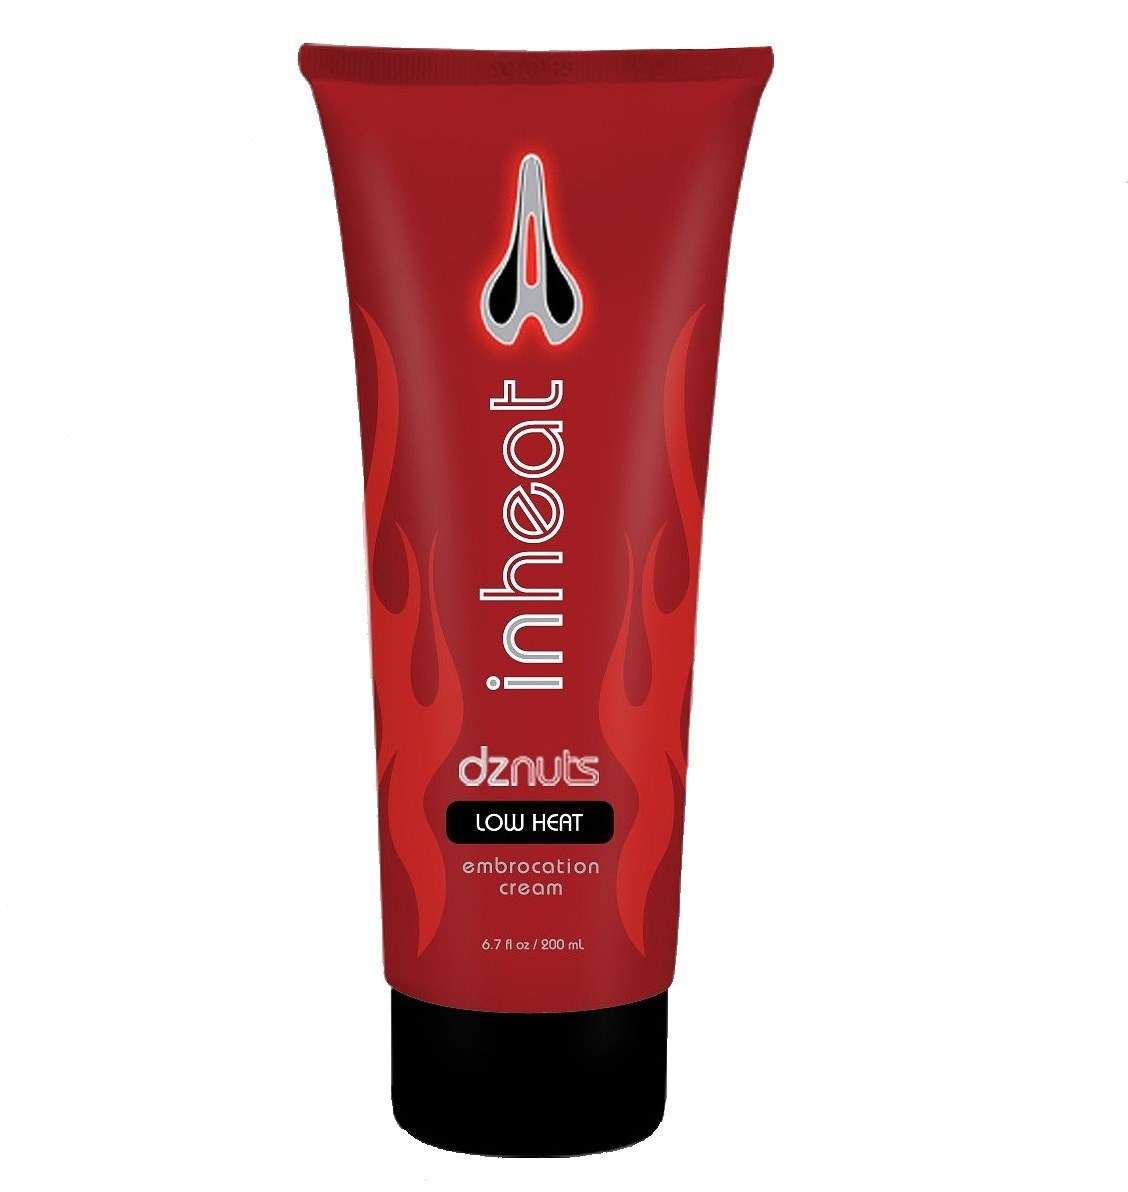 Dznuts In-Heat Embrocation Cream - 200ml Tube product image